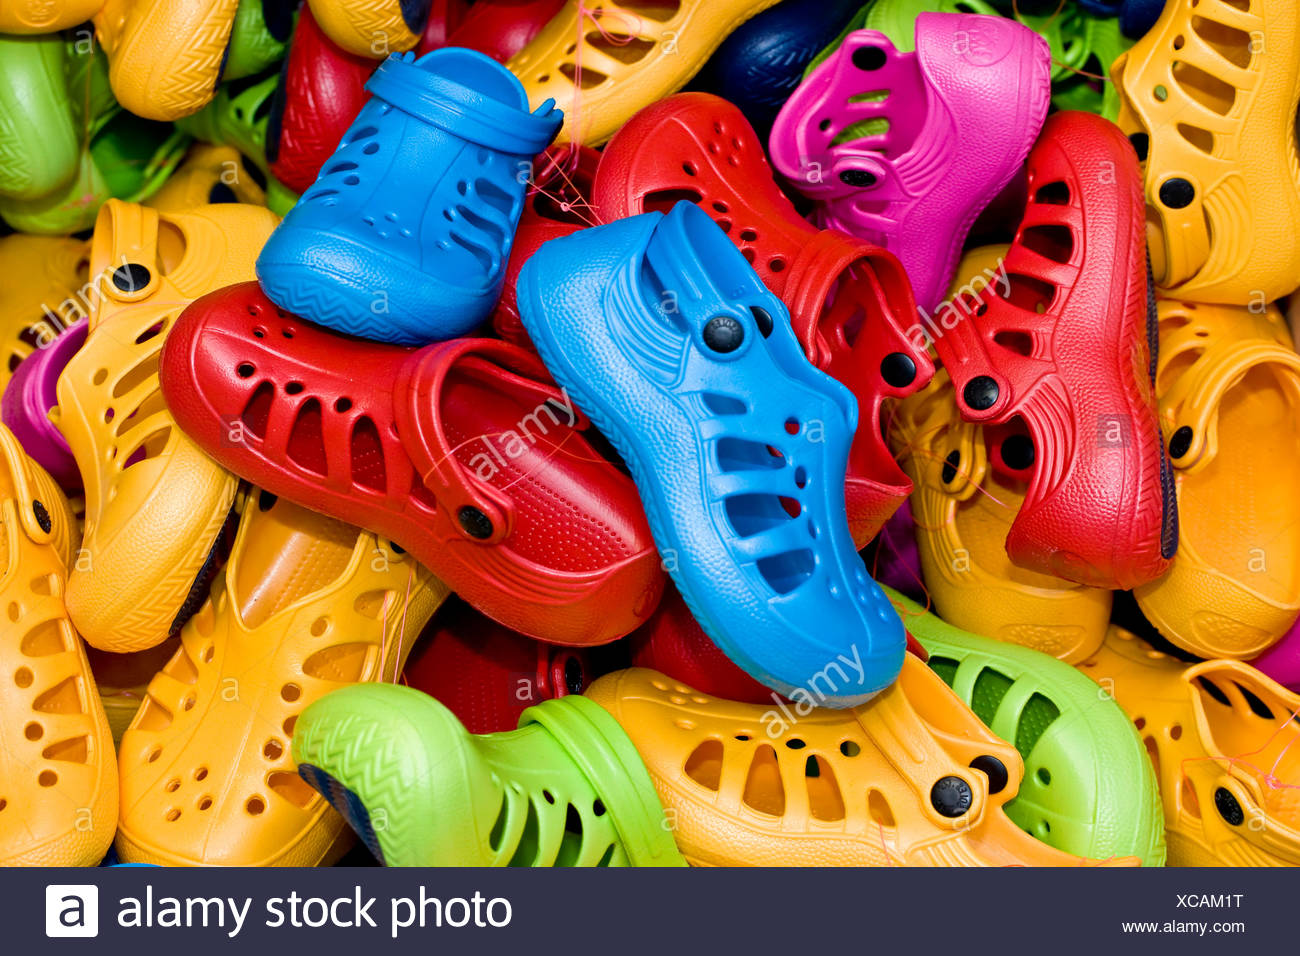 Plastic Shoes High Resolution Stock Photography and Images - Alamy